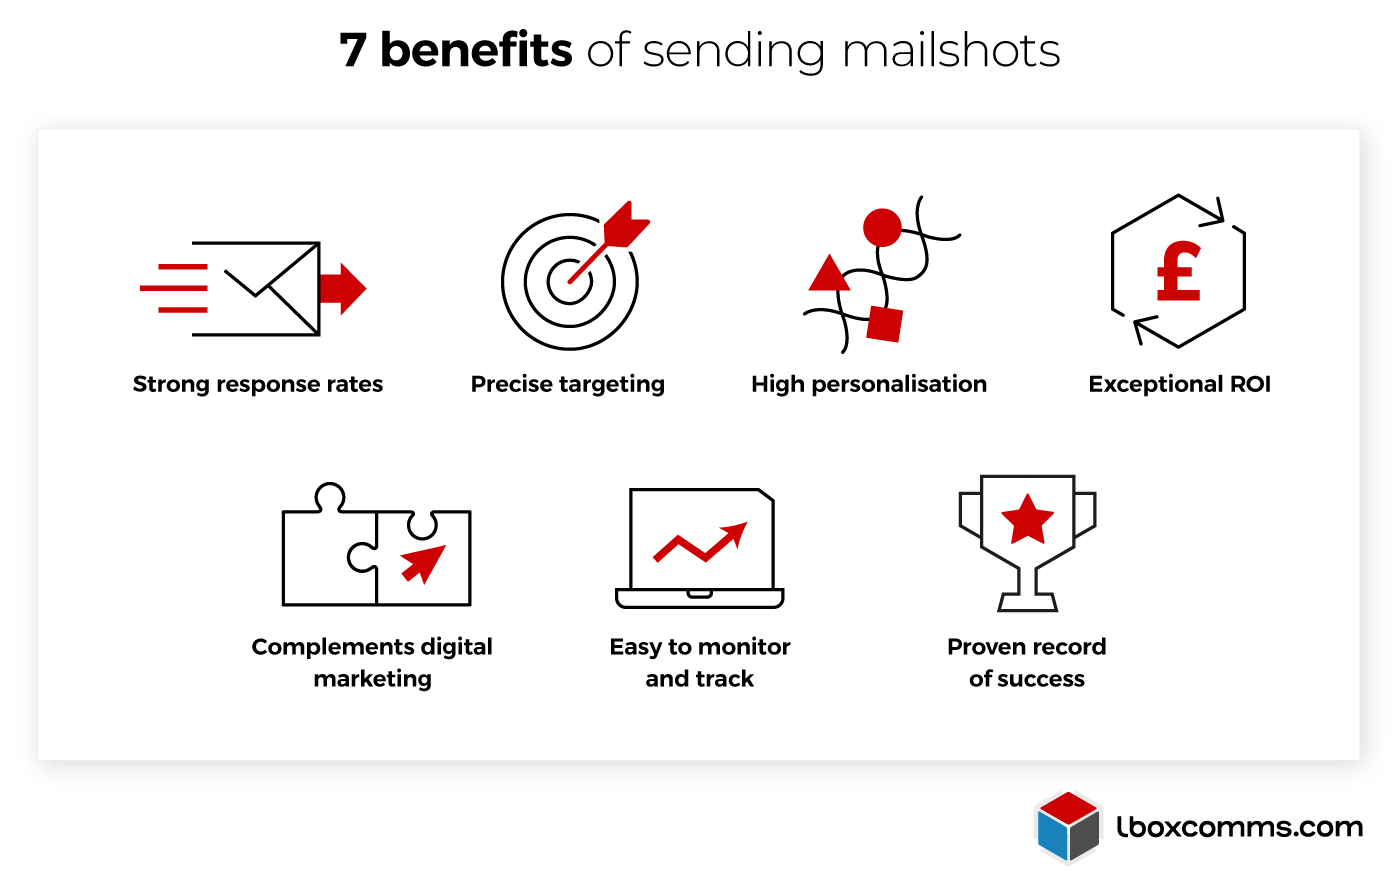 7 Benefits of sending mailshots - Infographic by Lbox Communications